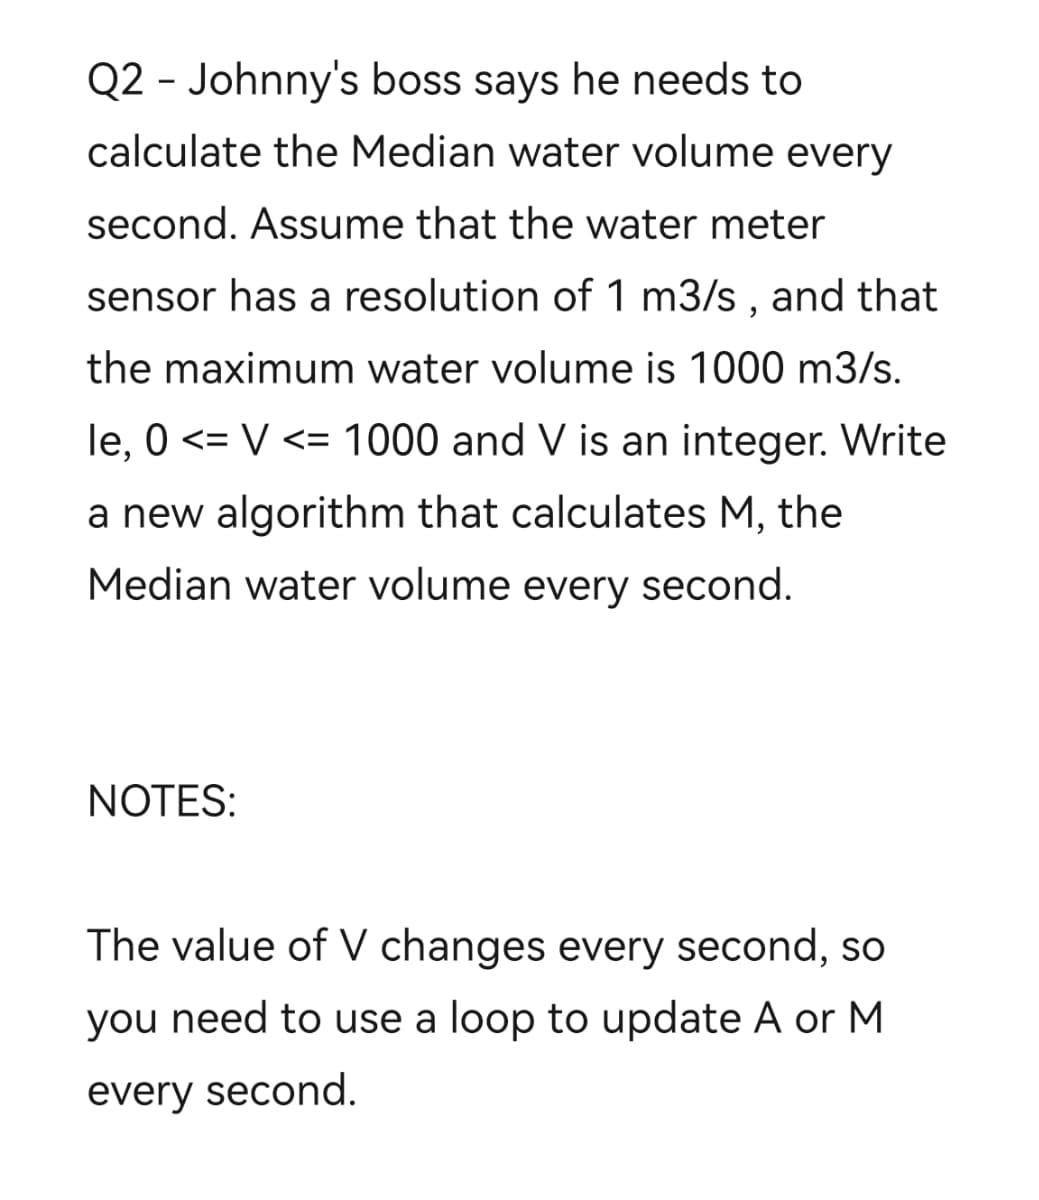 Q2 - Johnny's boss says he needs to
calculate the Median water volume every
second. Assume that the water meter
sensor has a resolution of 1 m3/s, and that
the maximum water volume is 1000 m3/s.
le, 0 <= V <= 1000 and V is an integer. Write
a new algorithm that calculates M, the
Median water volume every second.
NOTES:
The value of V changes every second, so
you need to use a loop to update A or M
every second.